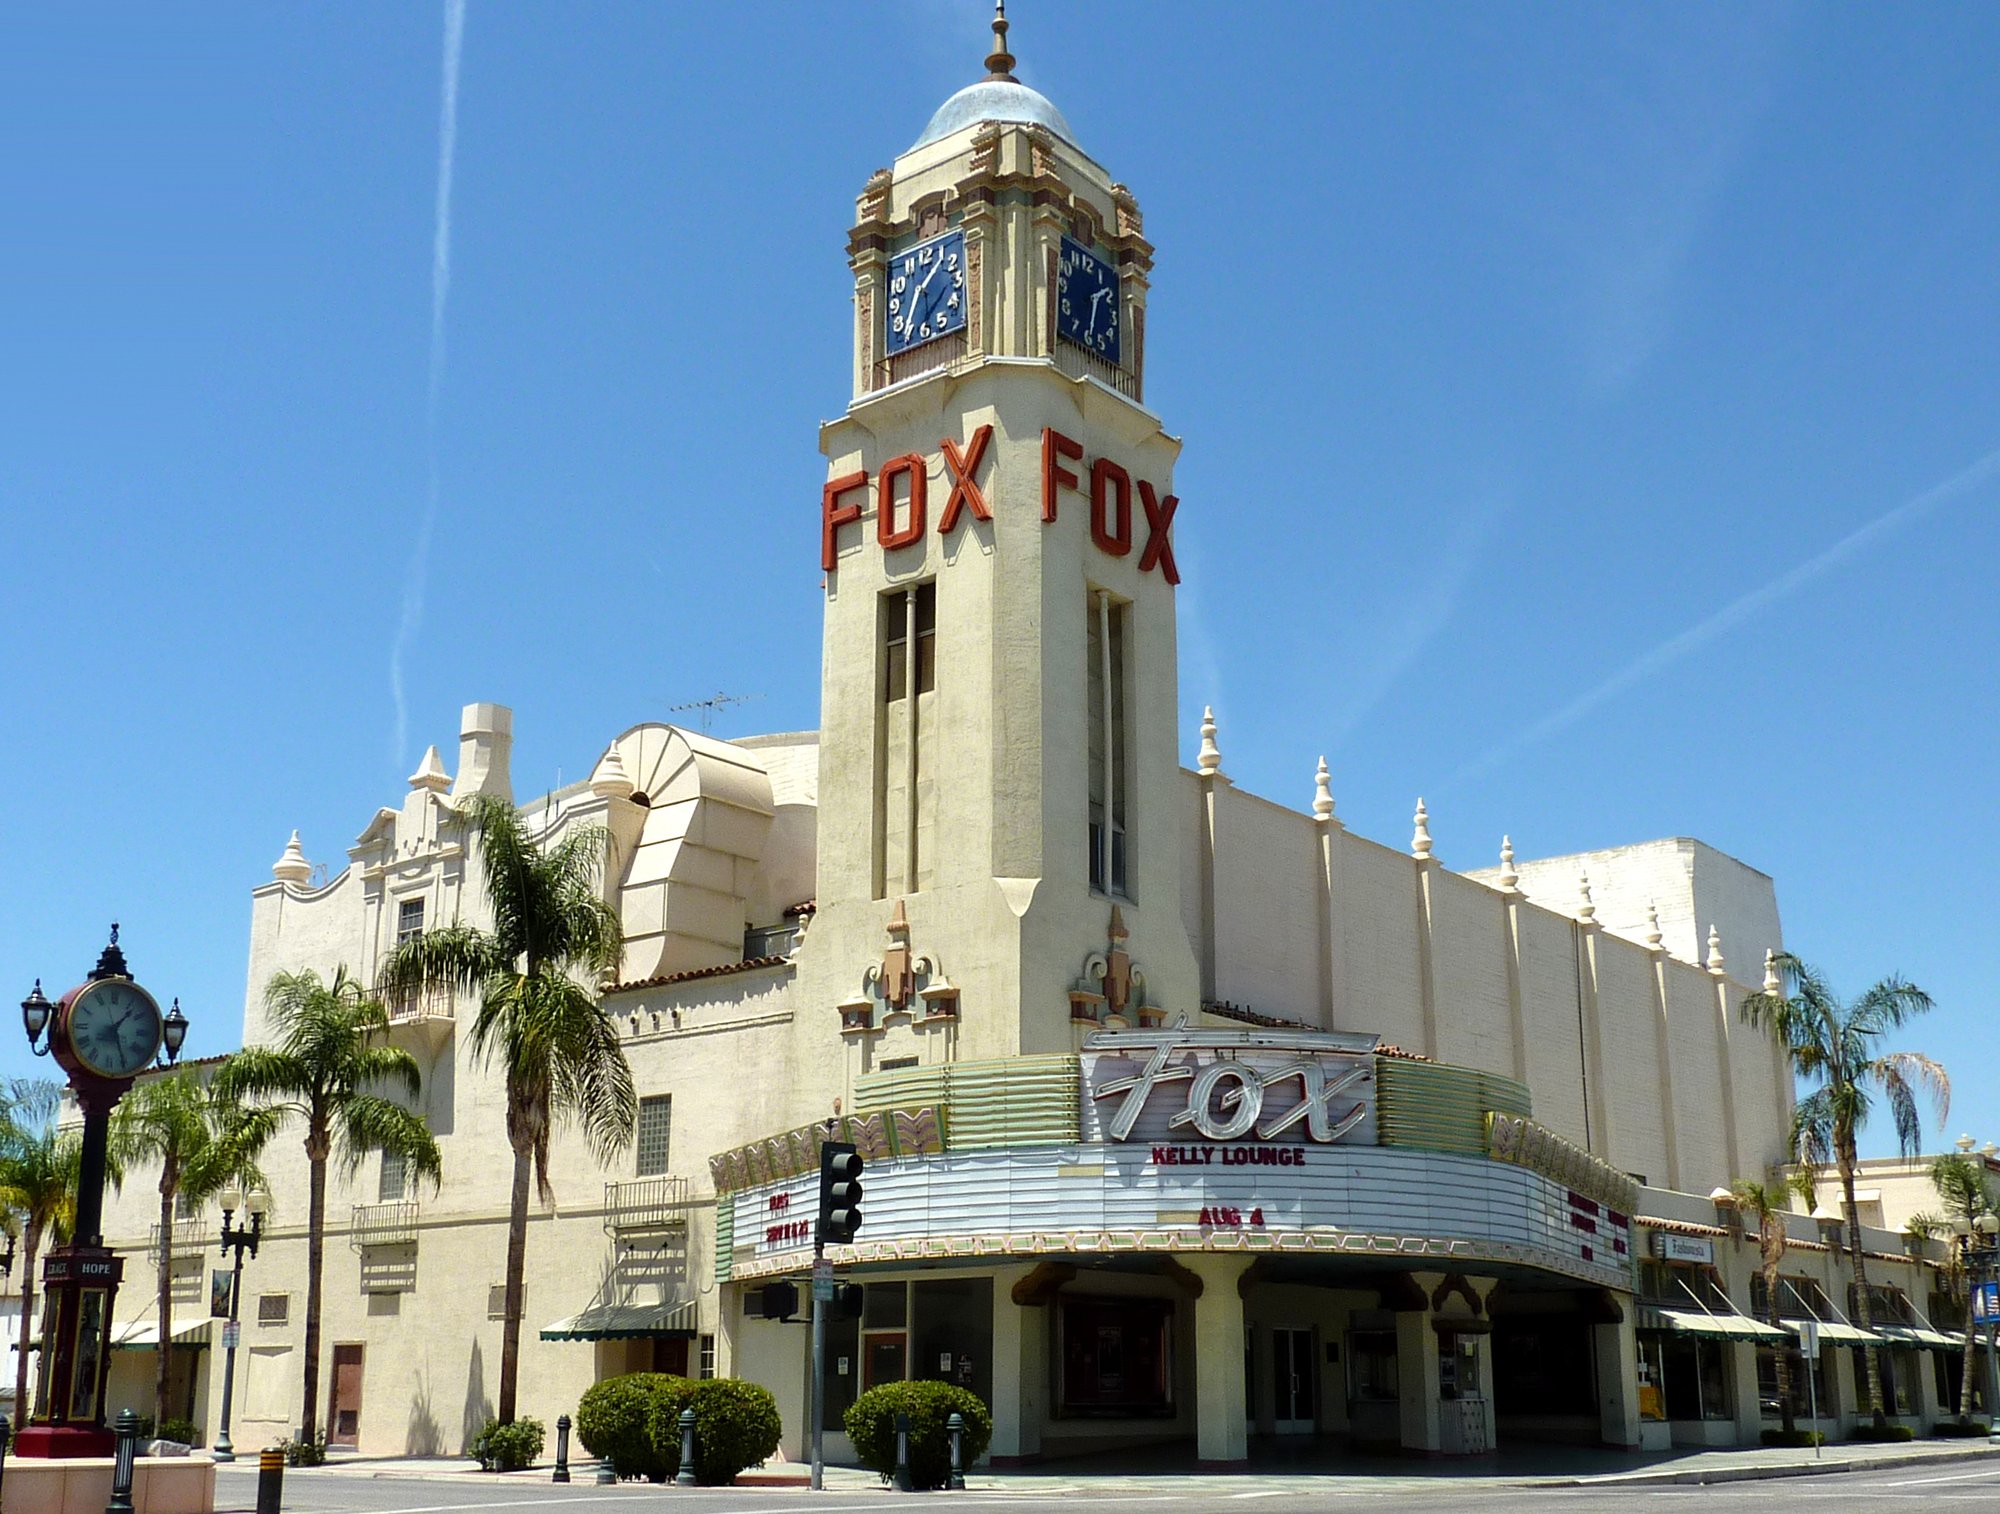 2009-0726-CA-Bakersfield-FoxTheater_(cropped)